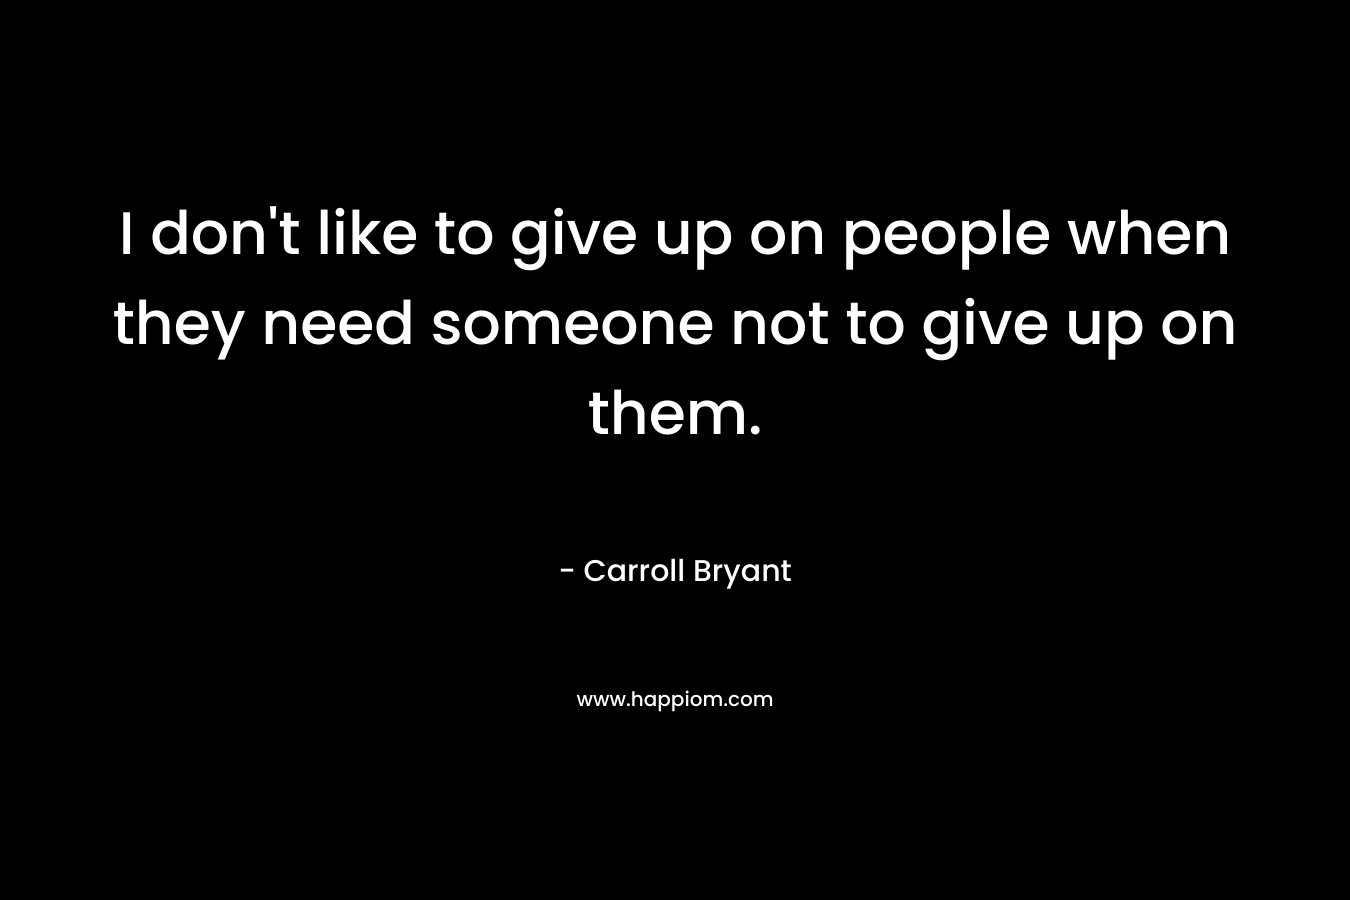 I don't like to give up on people when they need someone not to give up on them.